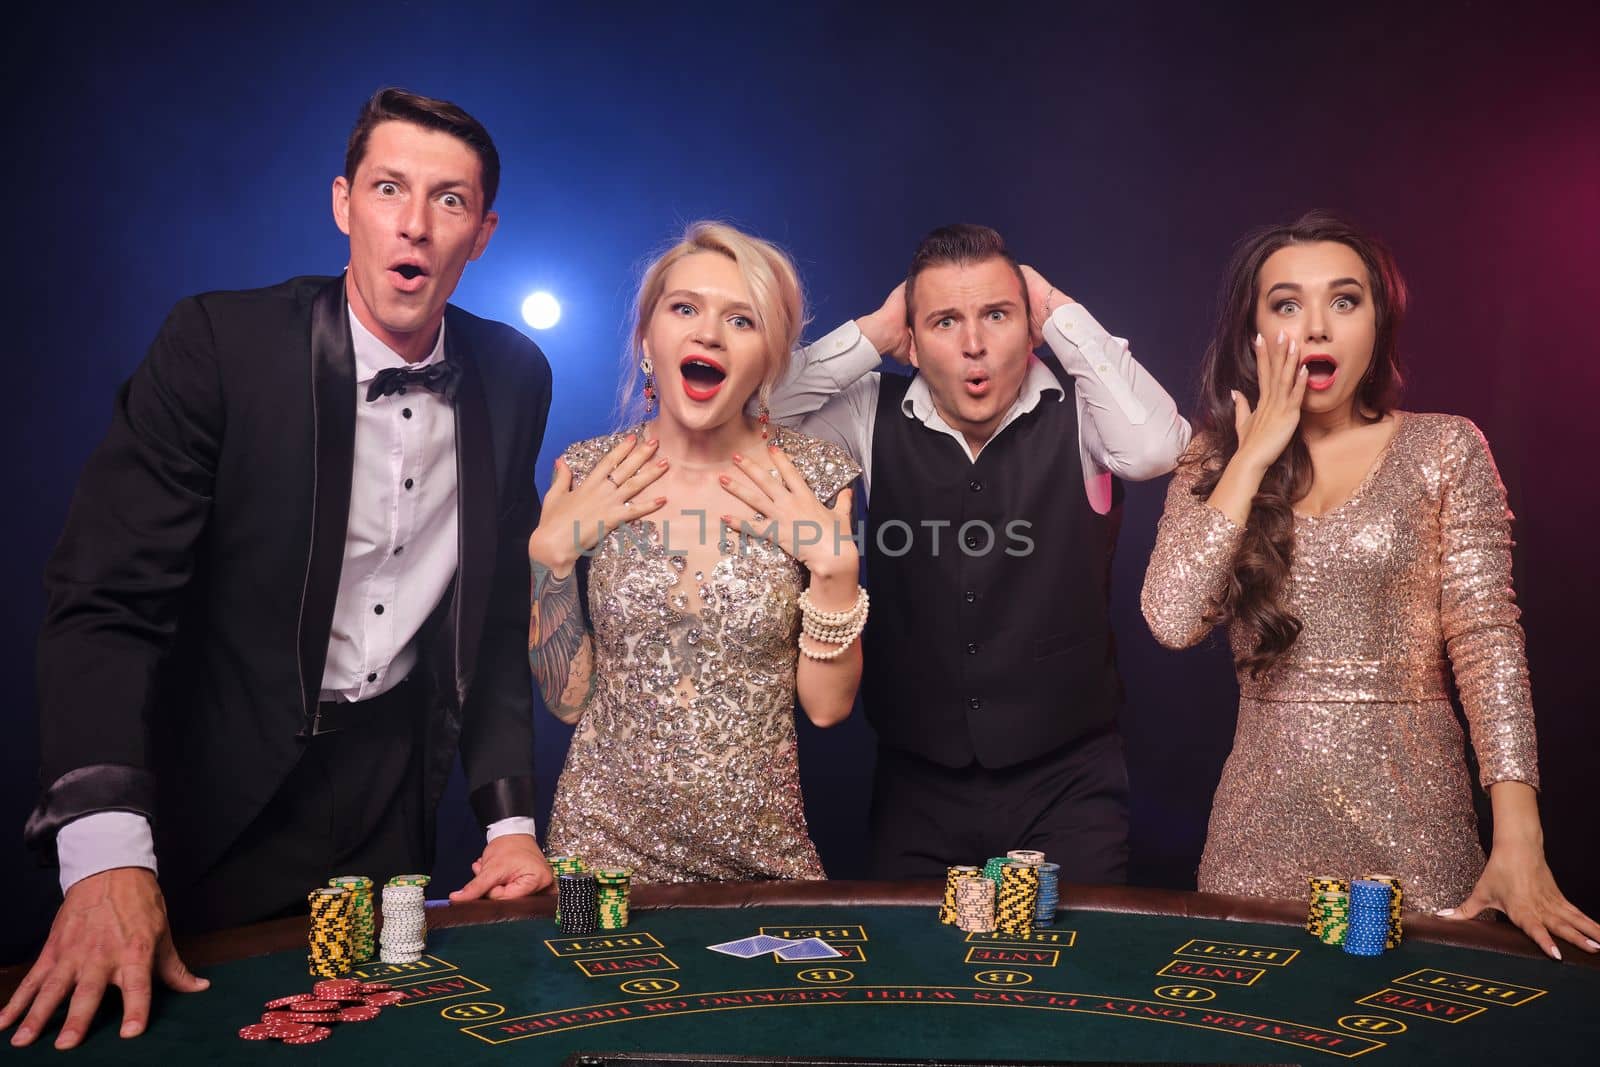 Group of a wondered rich companions are playing poker at casino. Youth are making bets waiting for a big win. They are looking shocked standing at the table against a red and blue backlights on black background. Risky gambling entertainment.